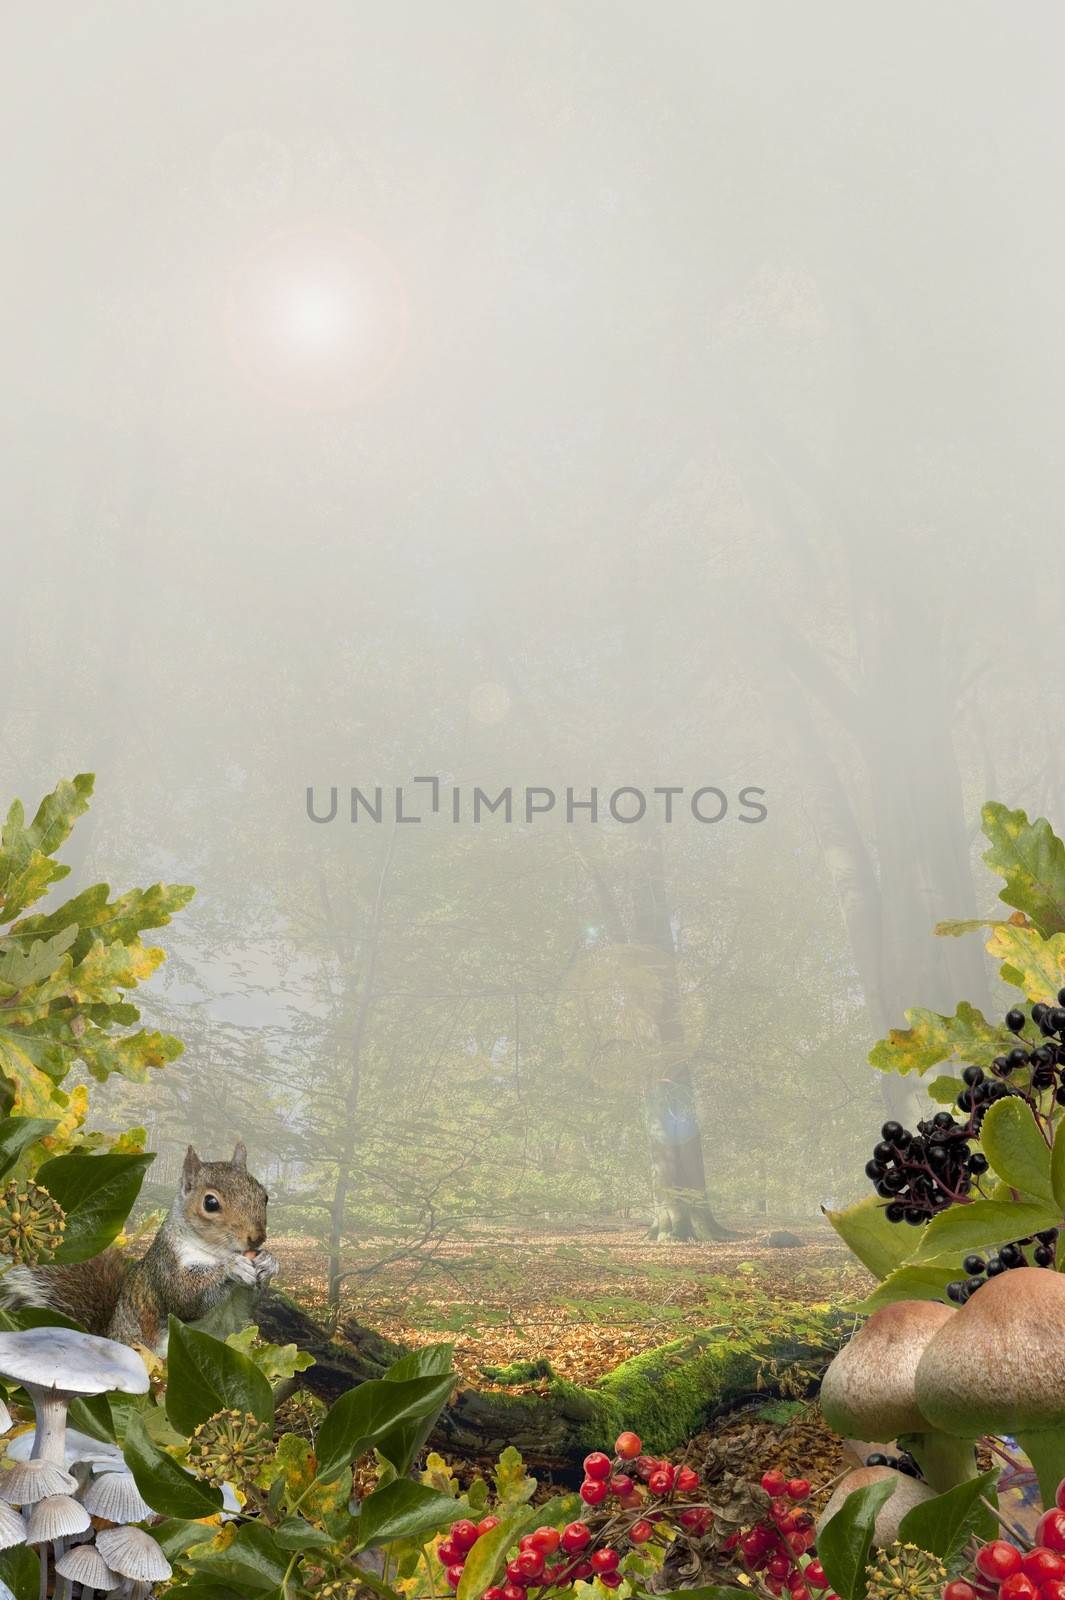 Autumn background with squirrel, berries and other flora set in a misty beech wood.